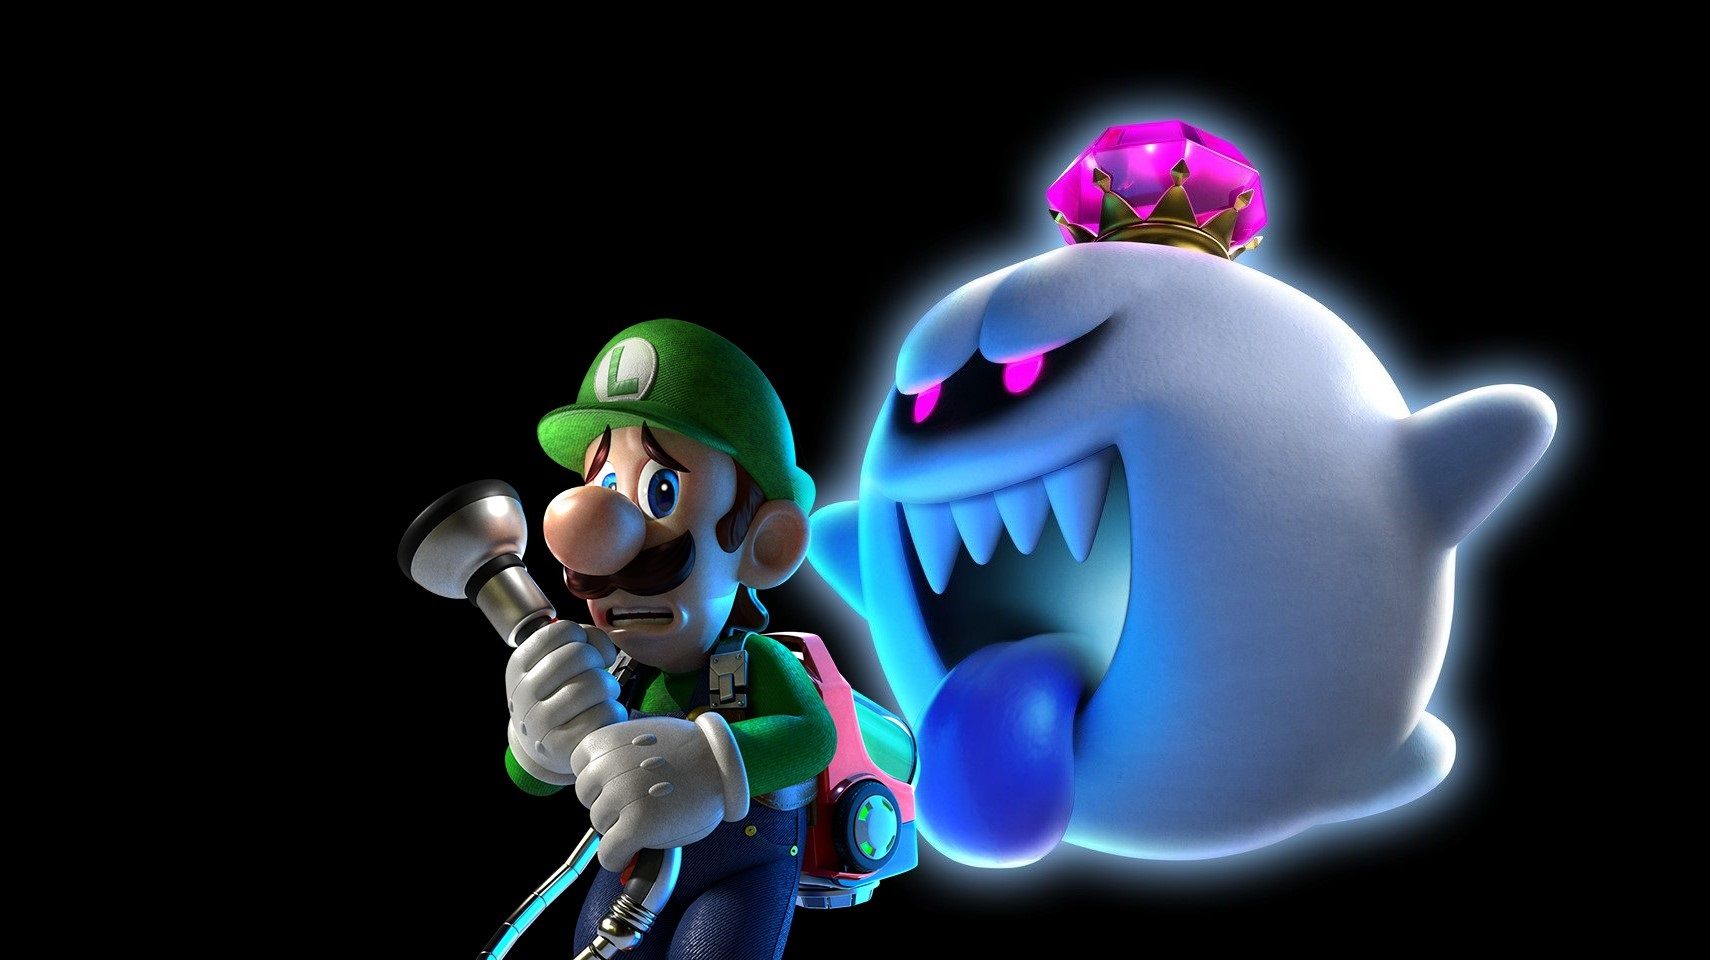 Luigis Mansion 3 Should Be Scary